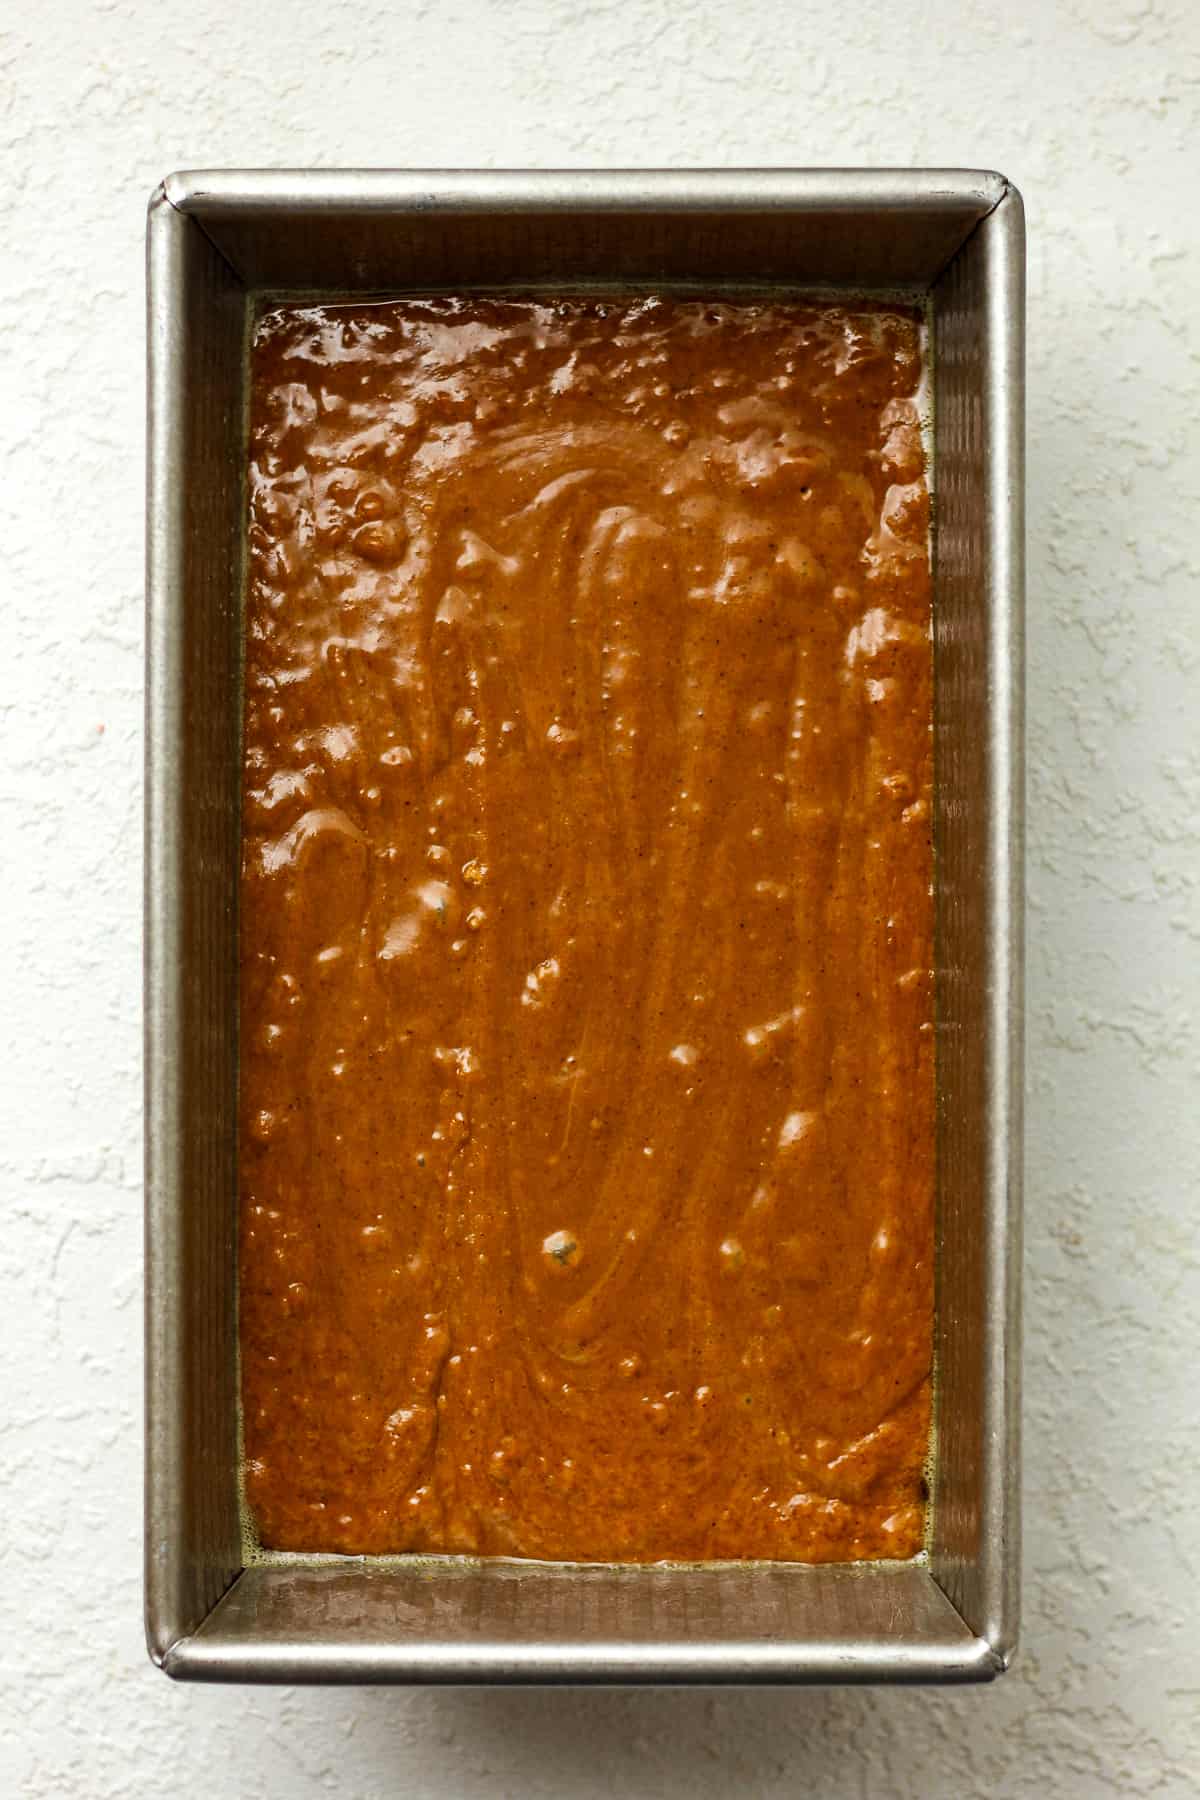 A large loaf pan filled with gingerbread batter.